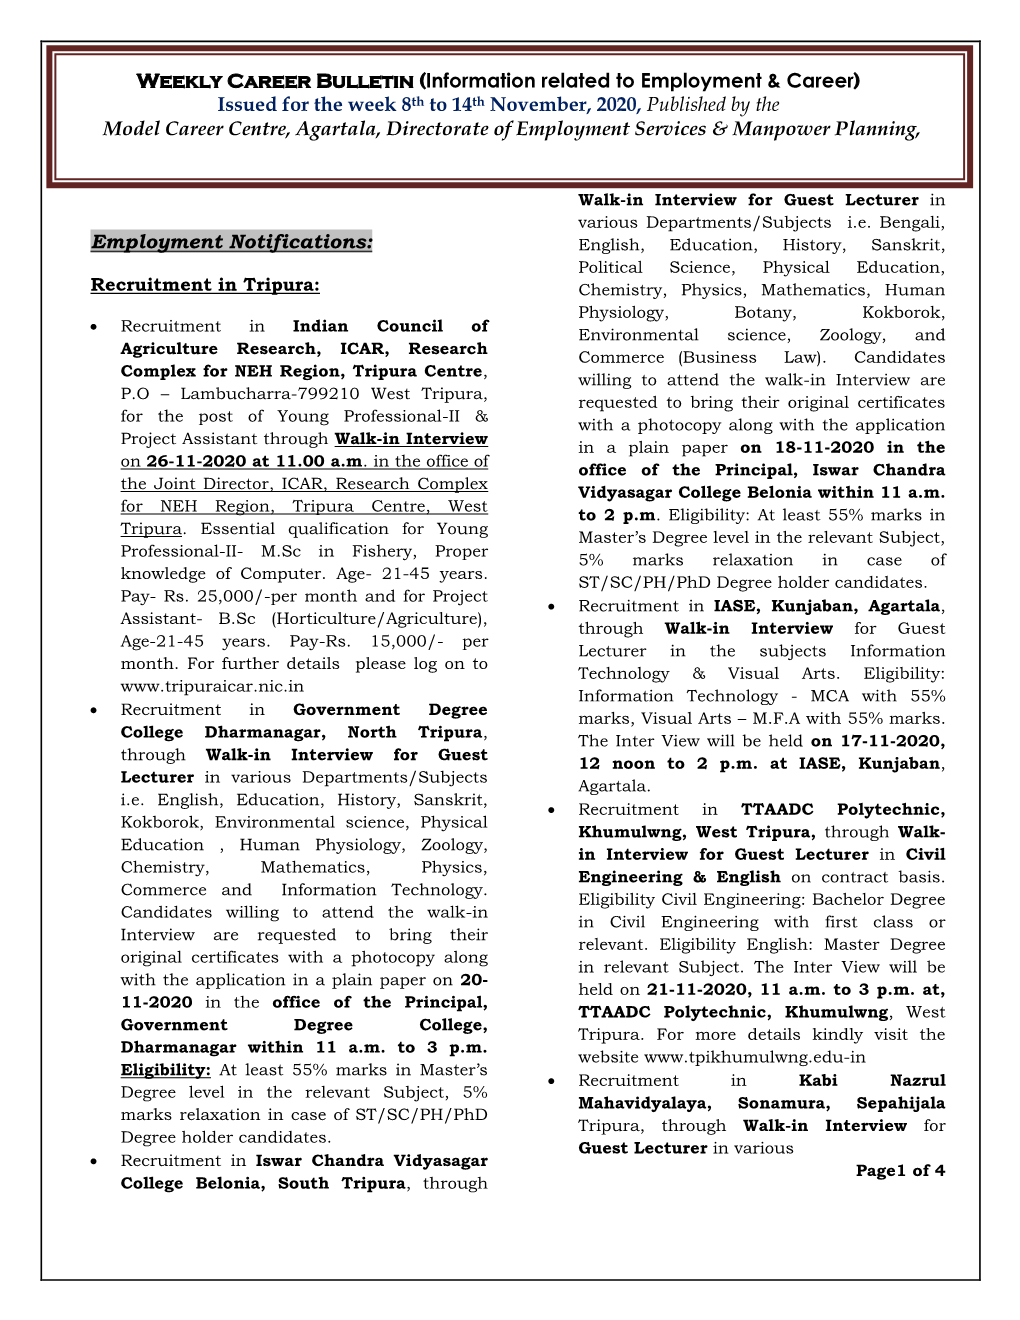 Employment Notifications: Weekly Career Bulletin (Information Related